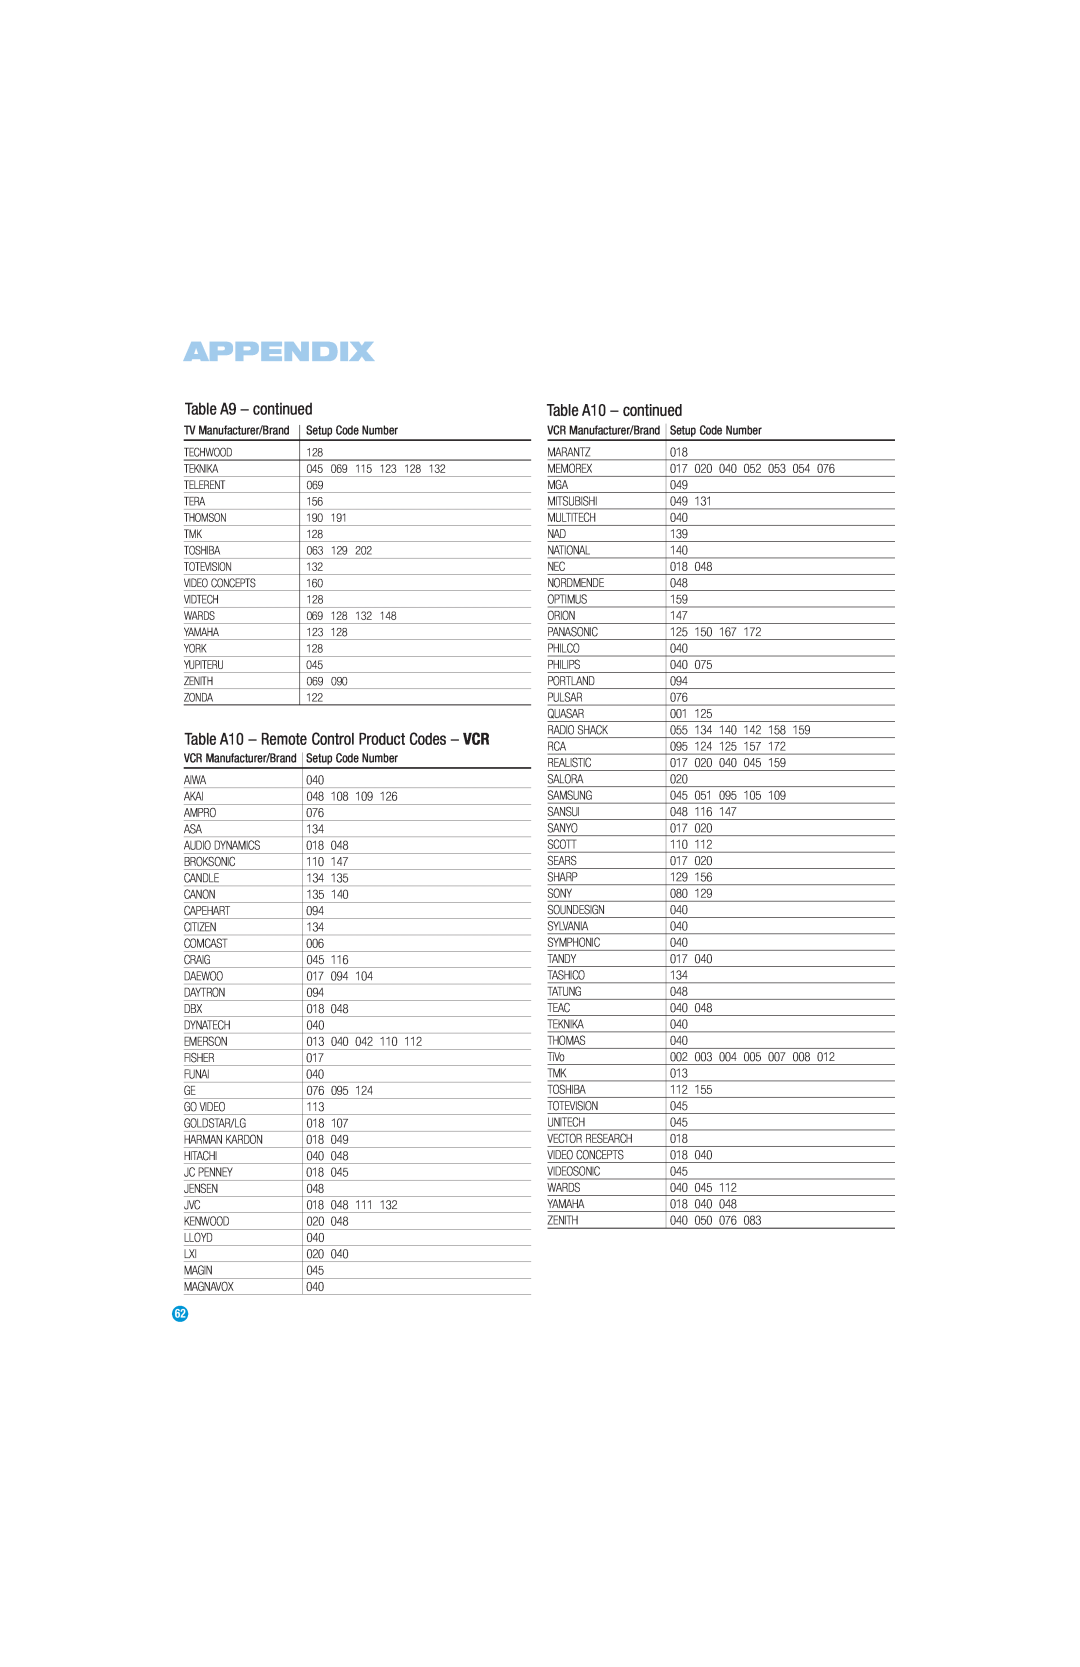 Harman-Kardon AVR 147 owner manual Table A9 – continued, Table A10 - continued, Appendix 